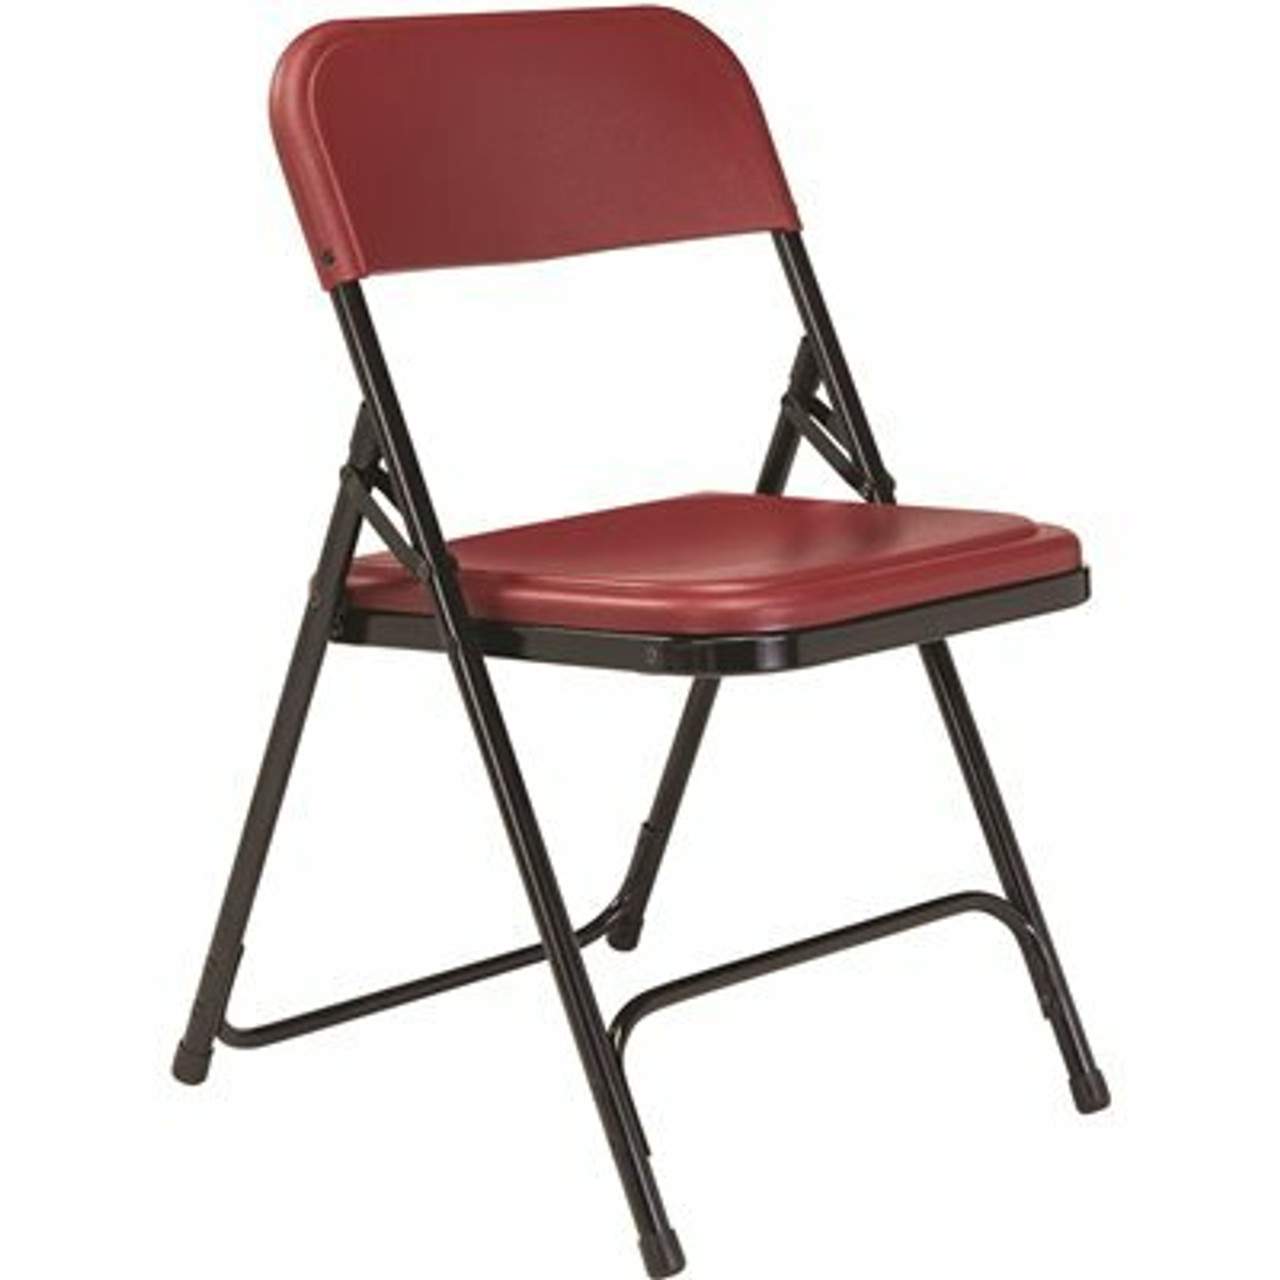 National Public Seating Burgundy Plastic Seat Stackable Outdoor Safe Folding Chair (Set Of 4)